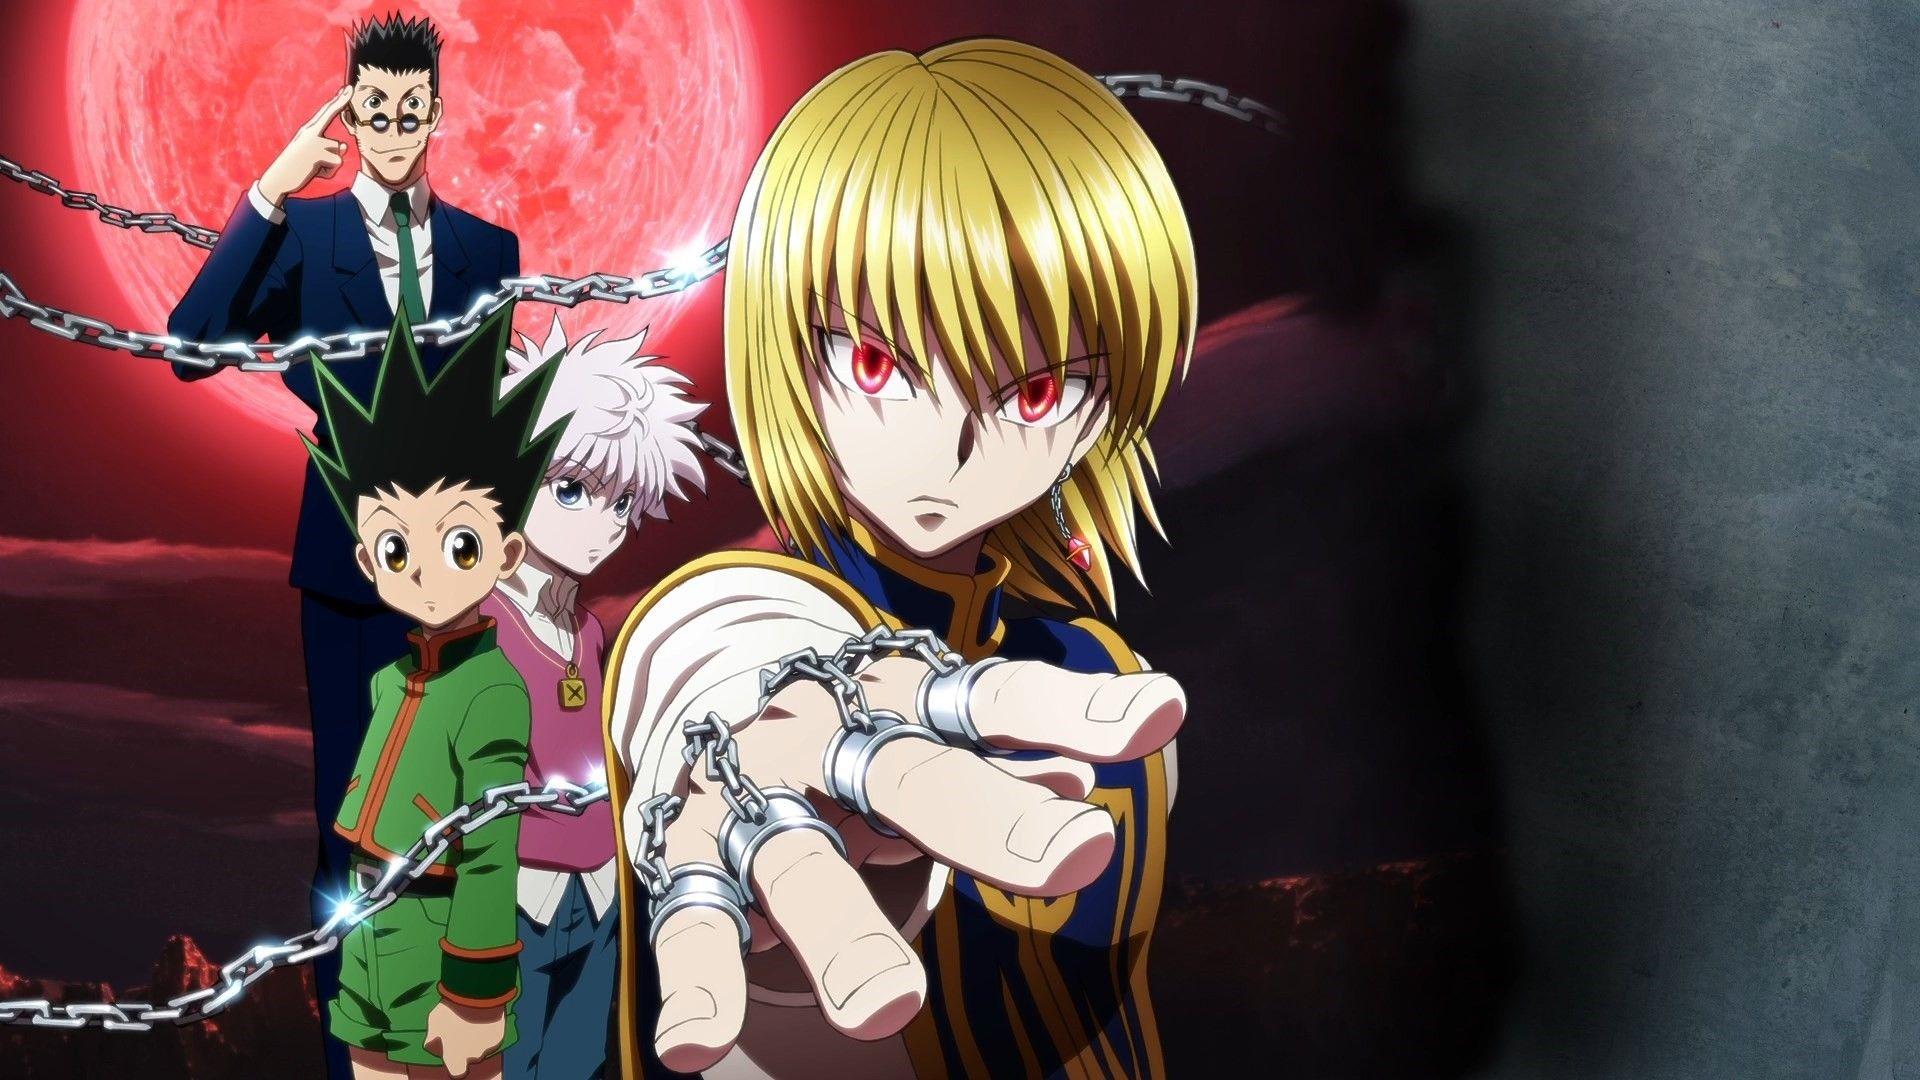 1920 x 1080 · jpeg - Aesthetic PC HxH Wallpapers - Wallpaper Cave